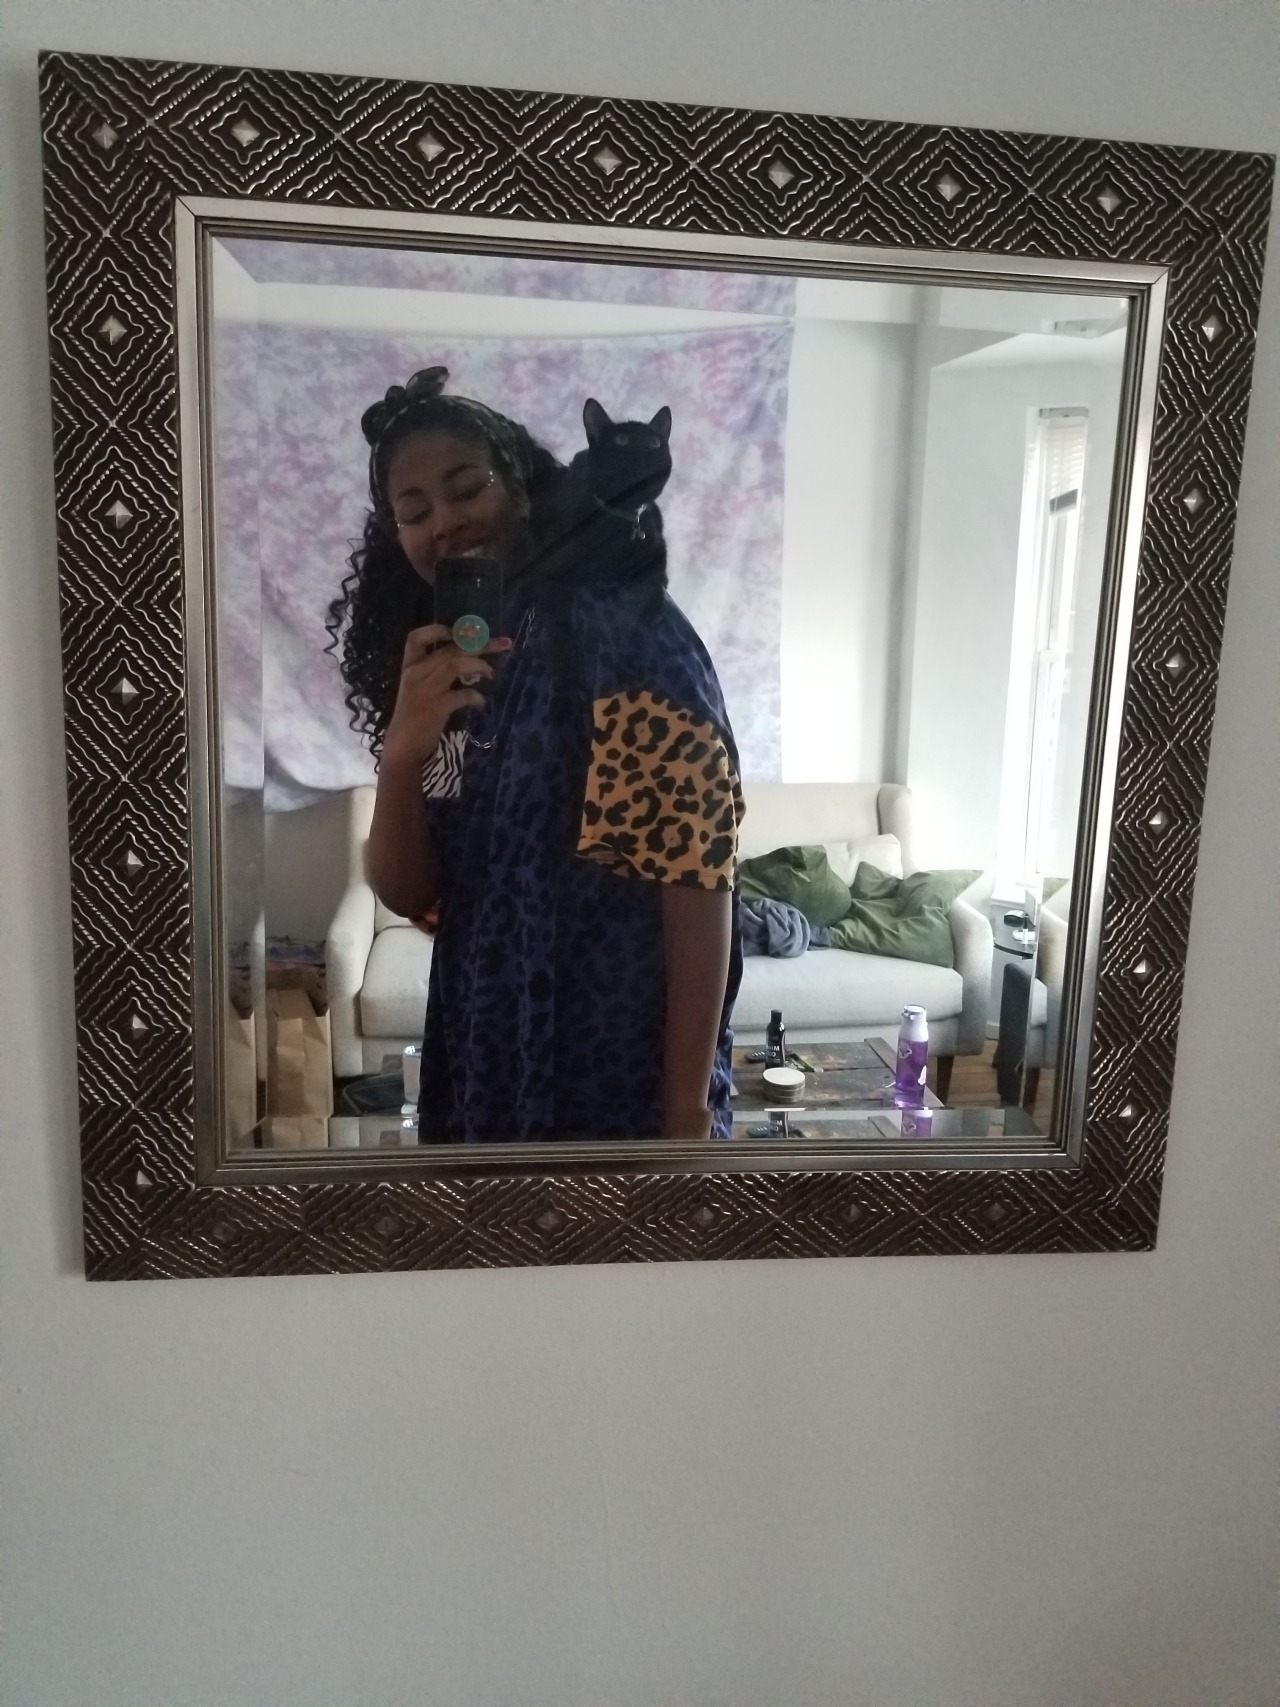 My roommate trained their kitty to sit on ppls shoulder’s and now she’s like a little familiar 😭🥰